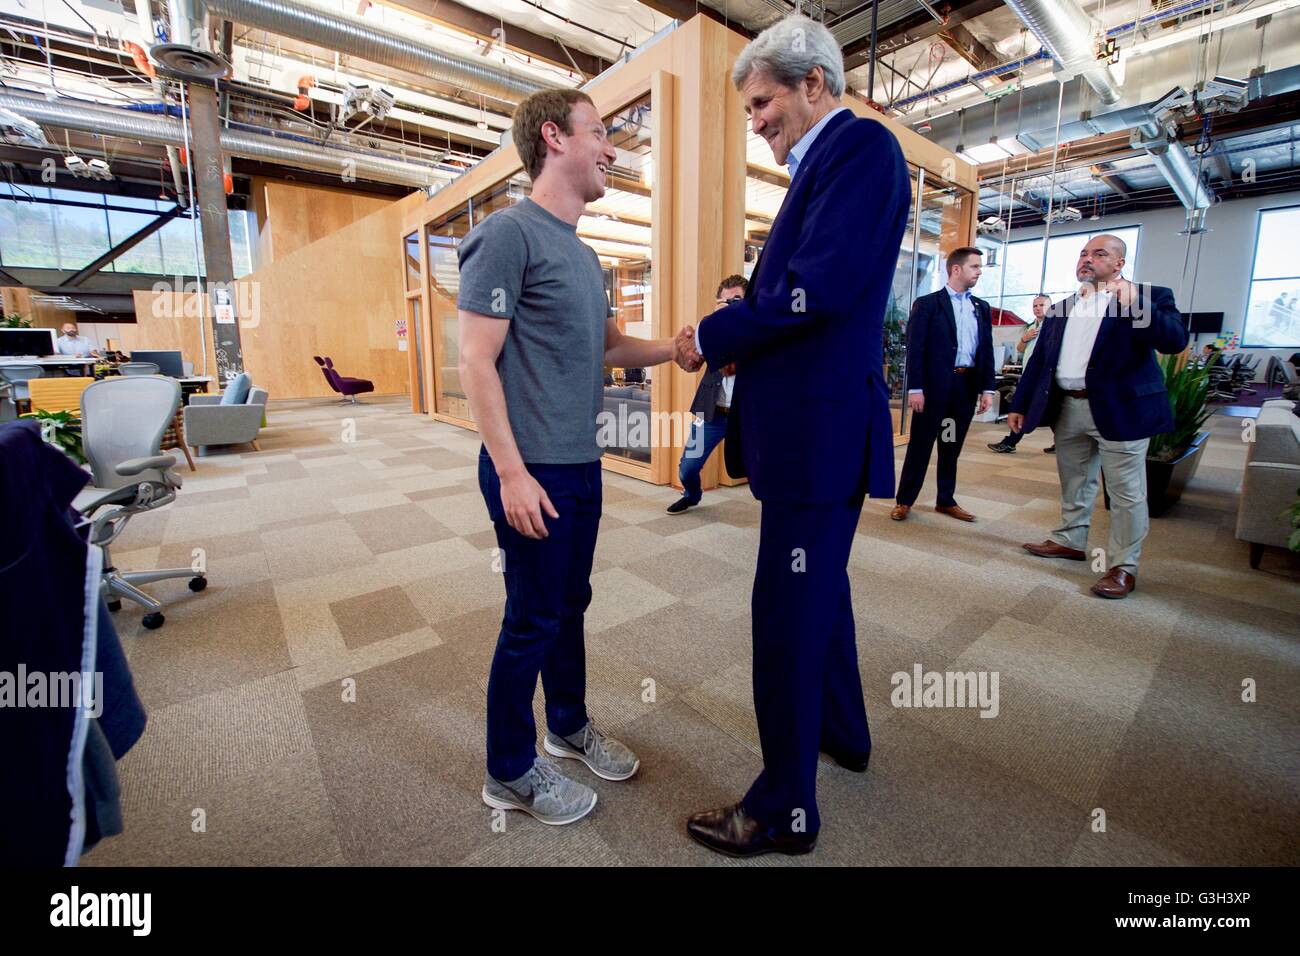 U.S. Secretary of State John Kerry greets Facebook CEO Mark Zuckerberg before their meeting at Facebook's new headquarters June 23, 2016 in Menlo Park, California. Kerry used his left hand as Zuckerberg is recovering from a broken right arm. Stock Photo